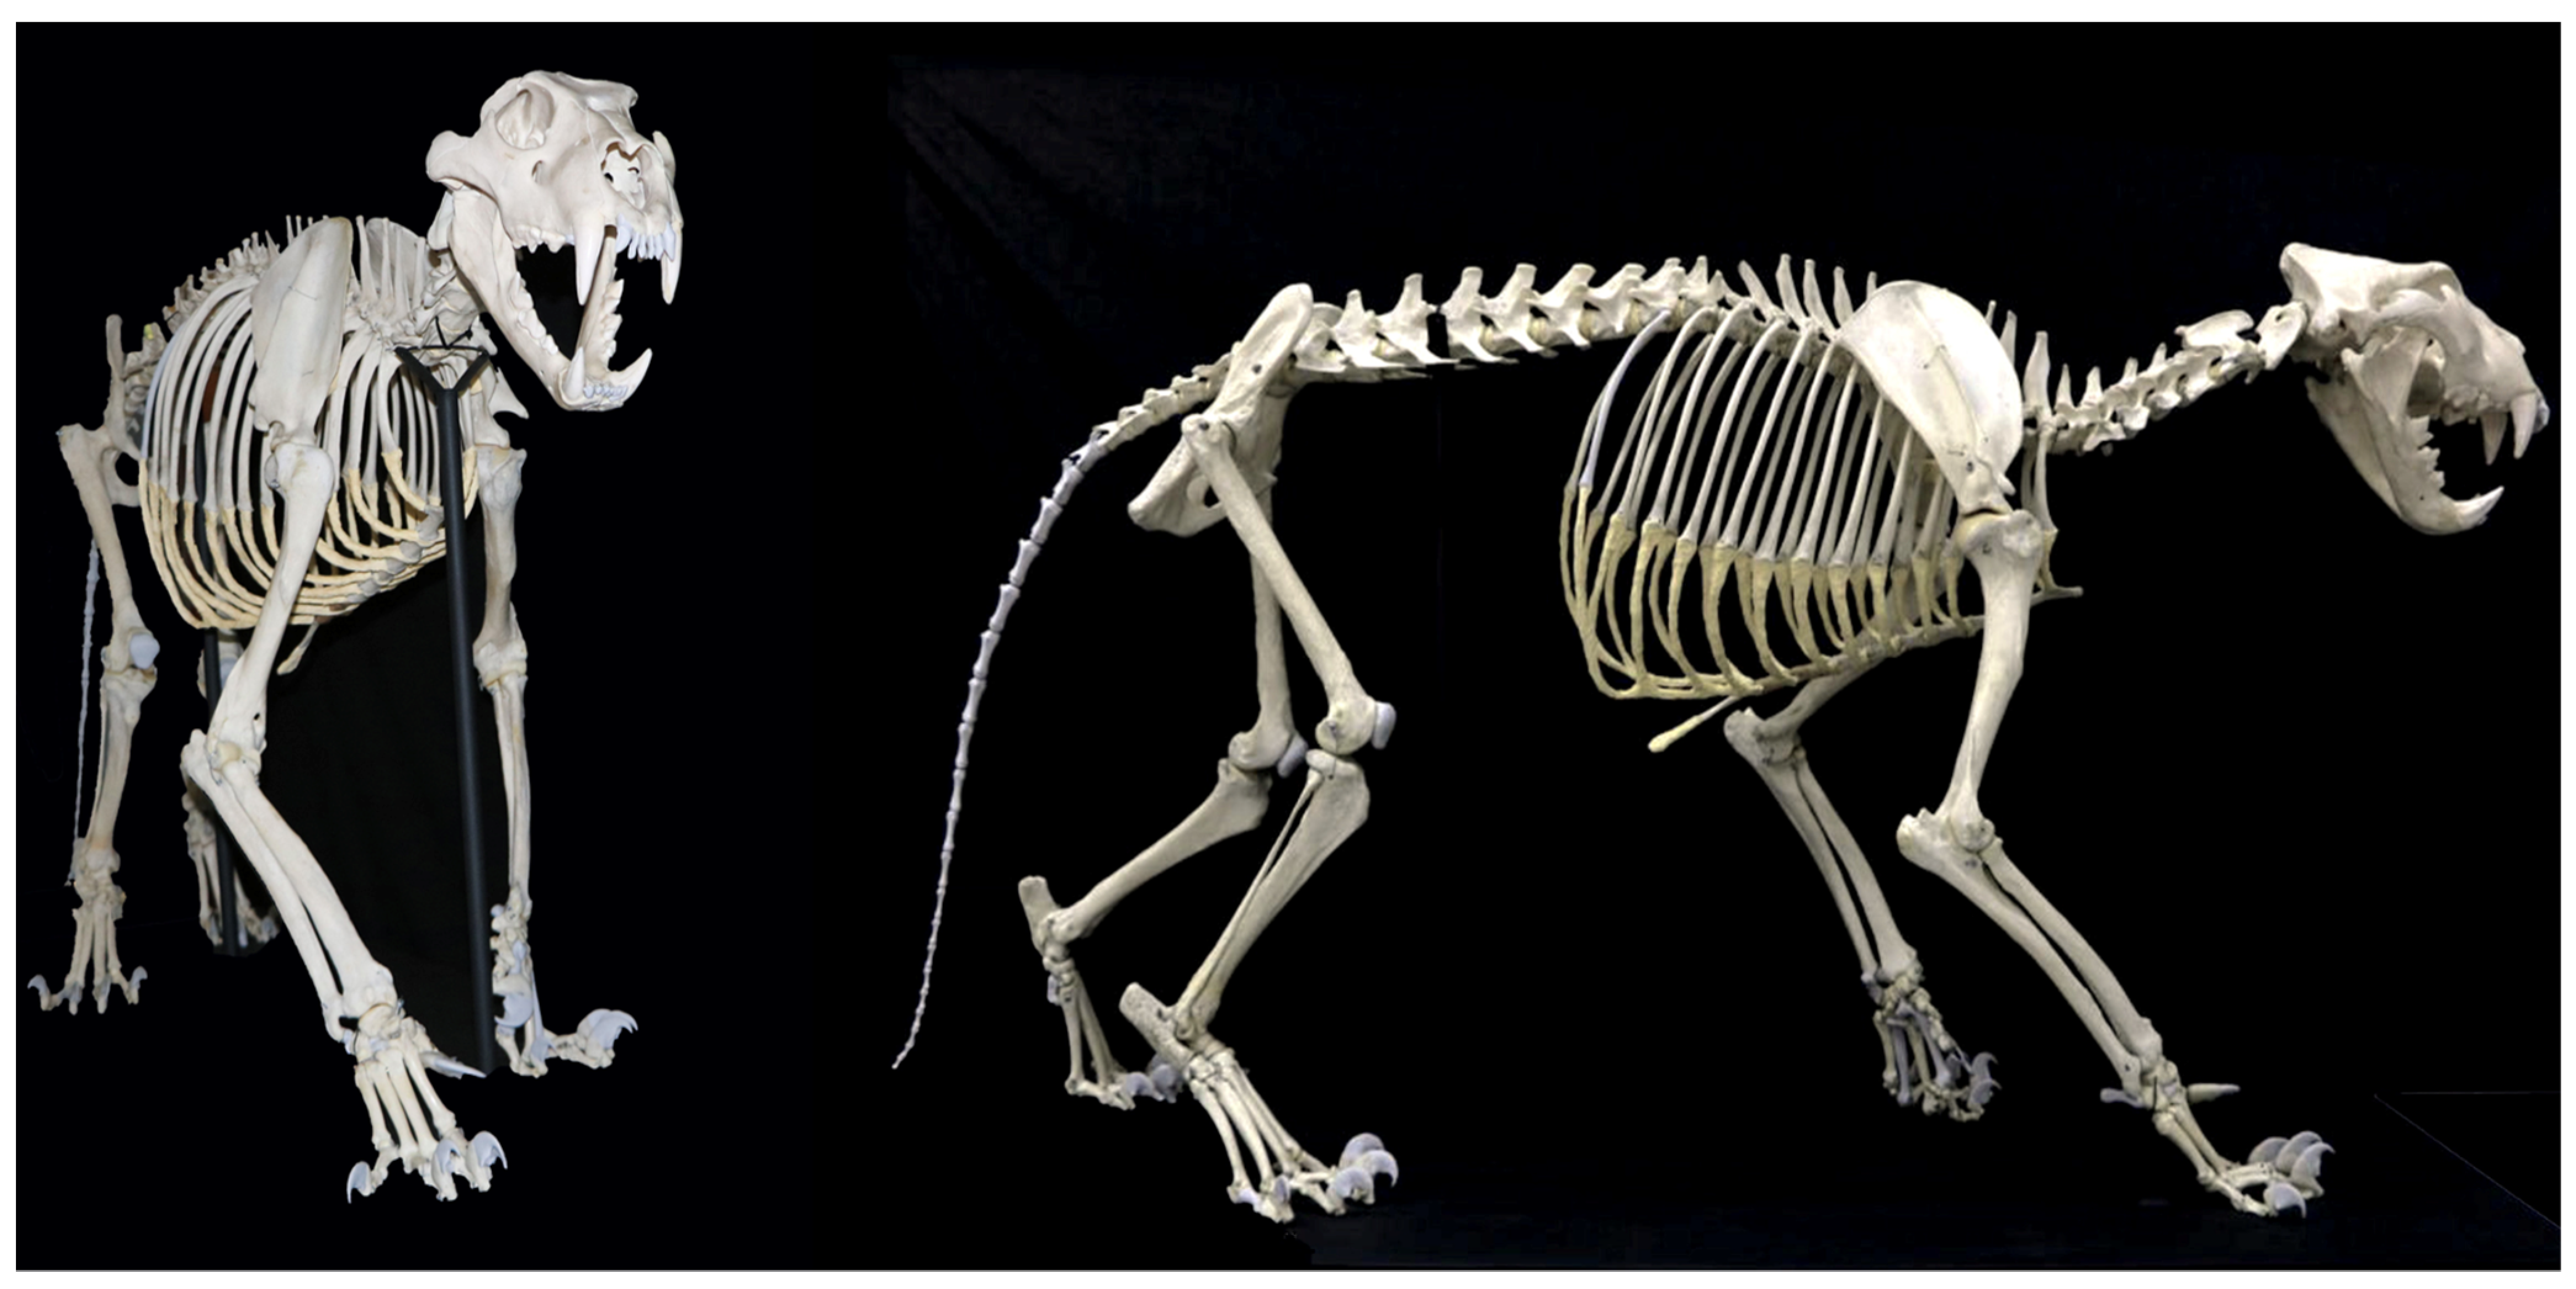 The extinct Sicilian wolf shows a complex history of isolation and